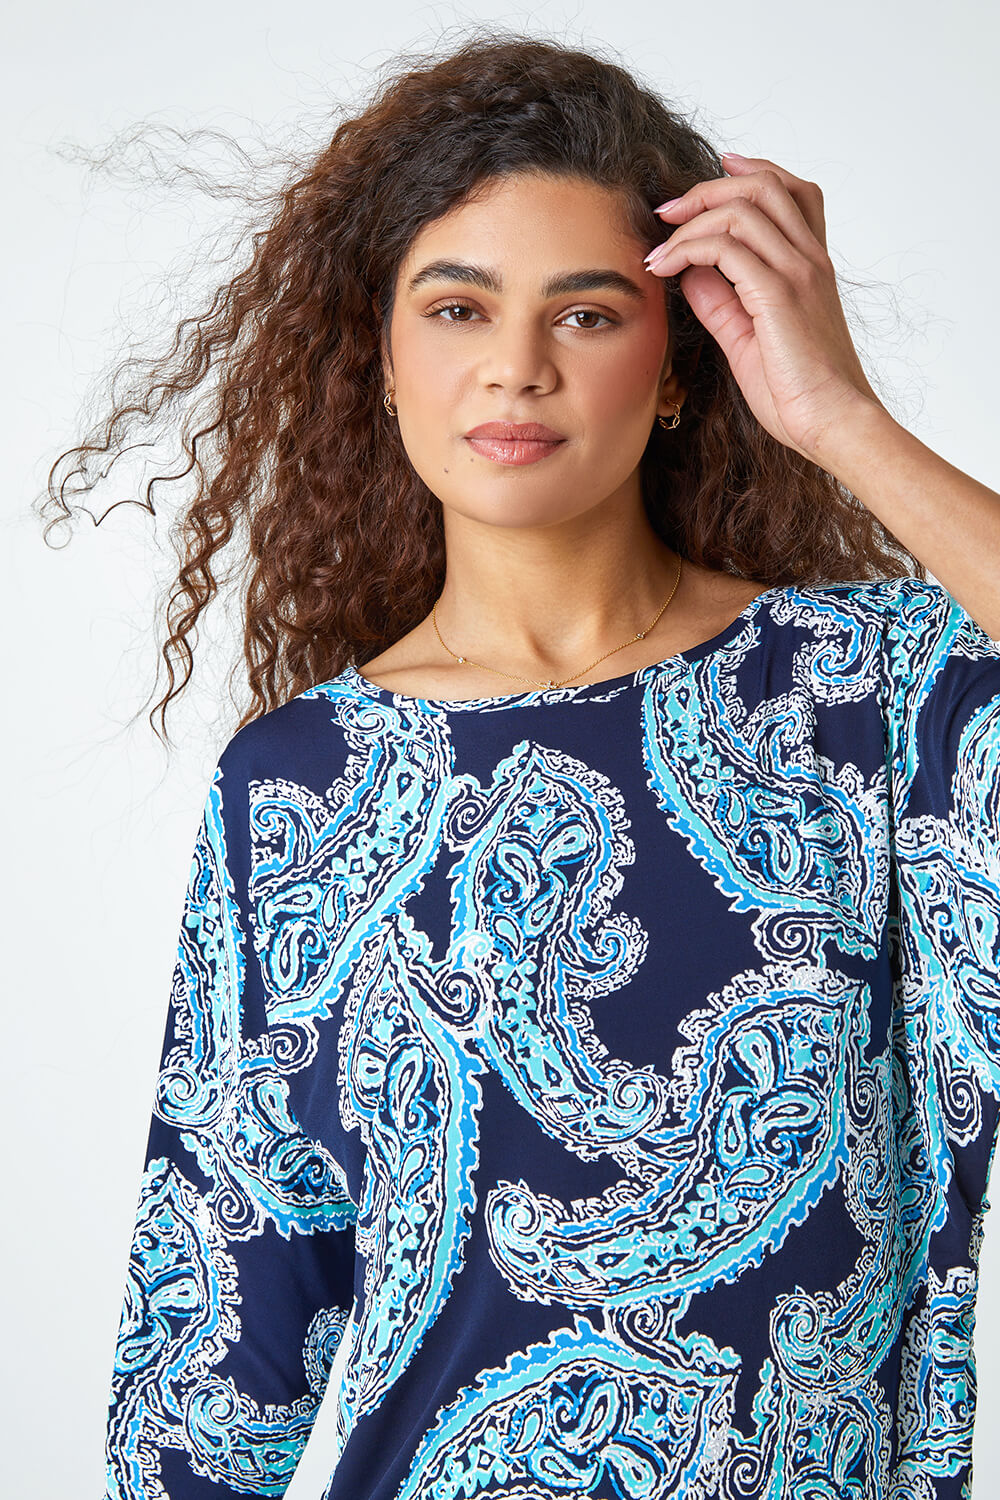 Blue Textured Paisley Print Stretch Top, Image 4 of 5